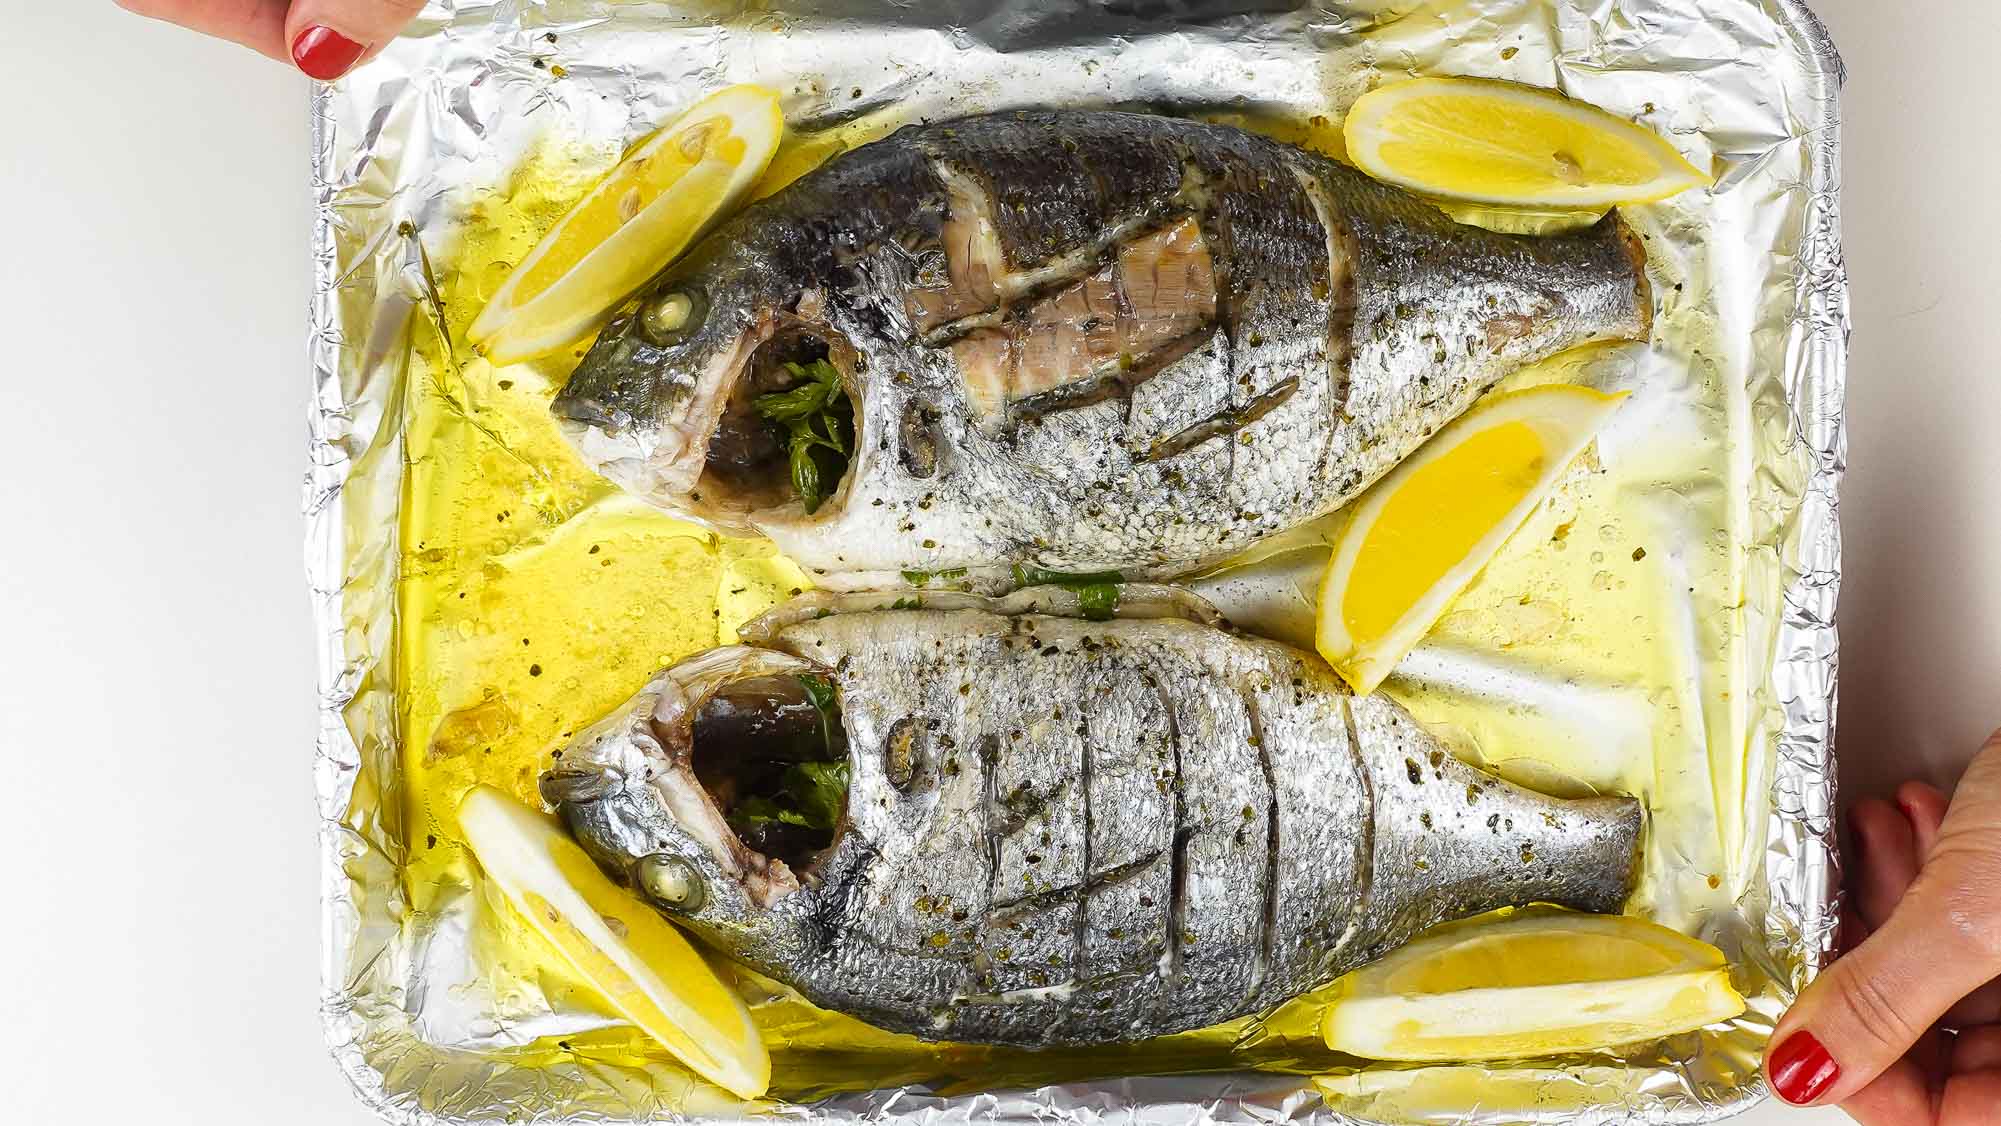 Foil baked Sea Bream with fresh lemon slices on a tray, in two hands.